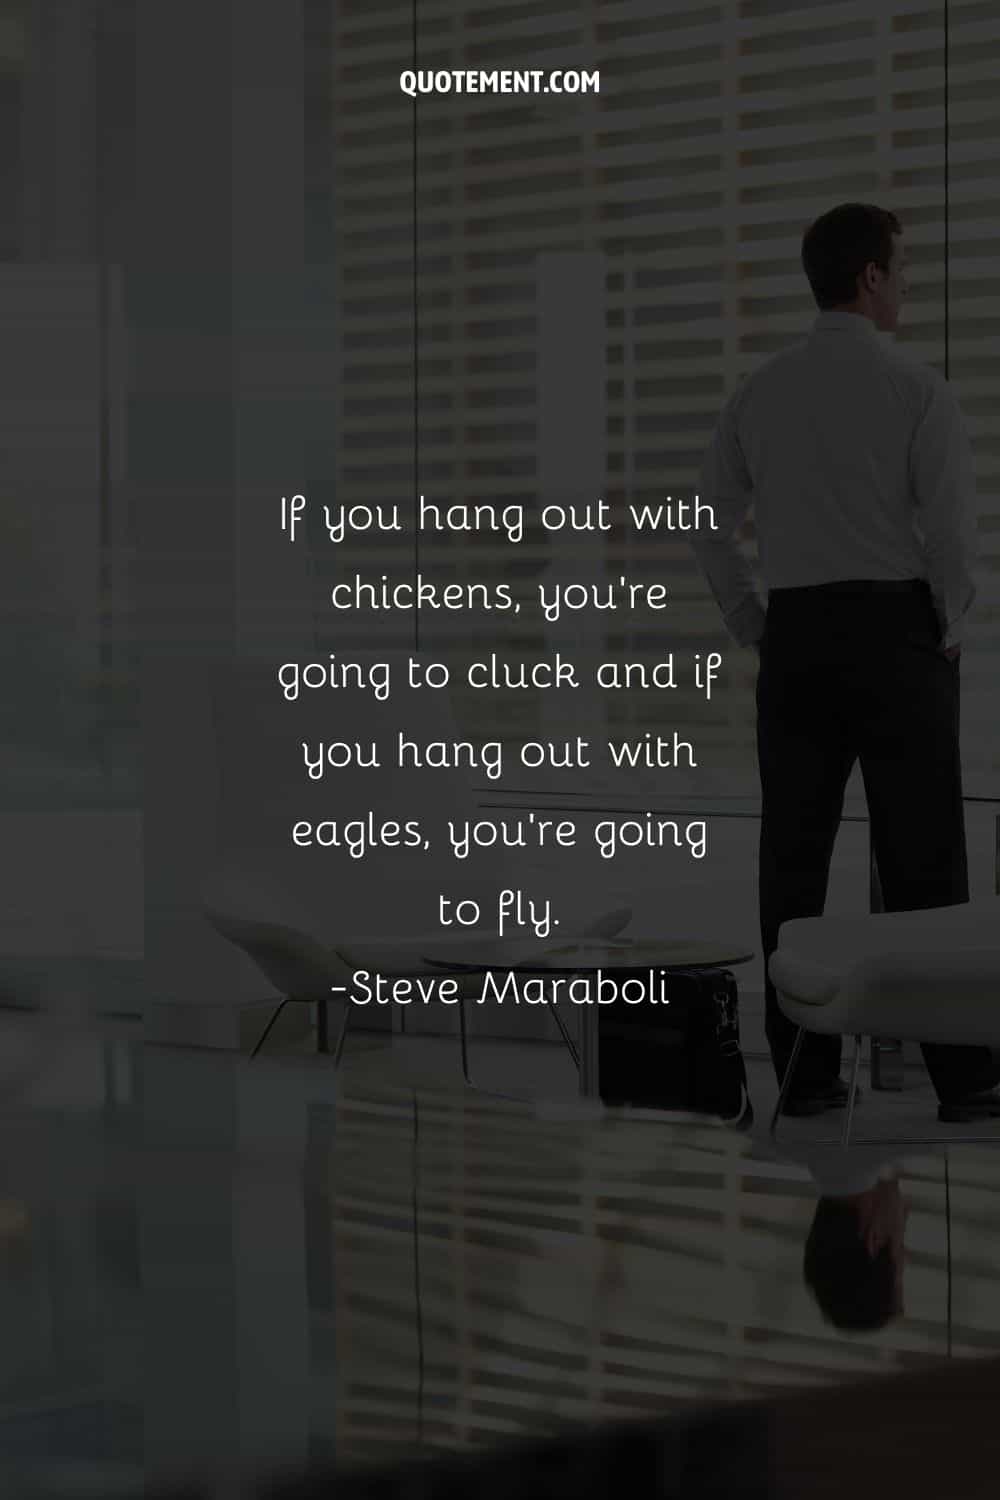 If you hang out with chickens, you're going to cluck and if you hang out with eagles, you're going to fly